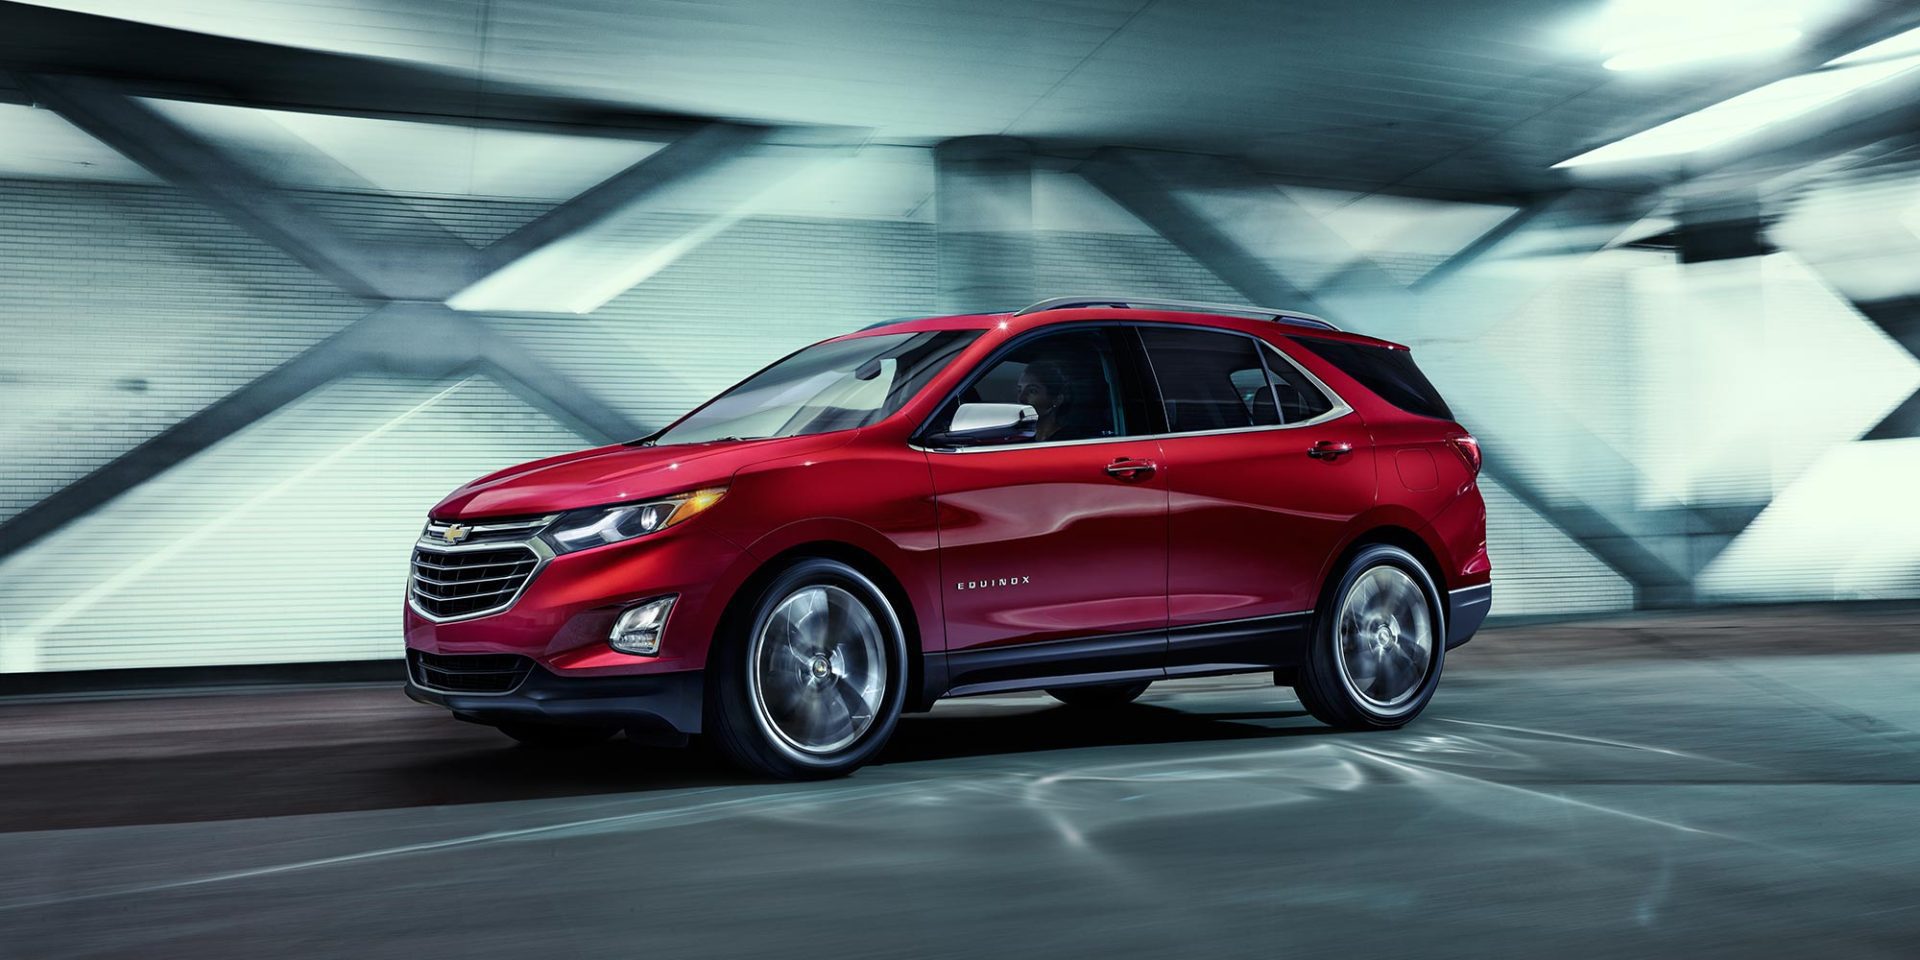 Chevy Equinox: The perfect vehicle for the young driver always on the move